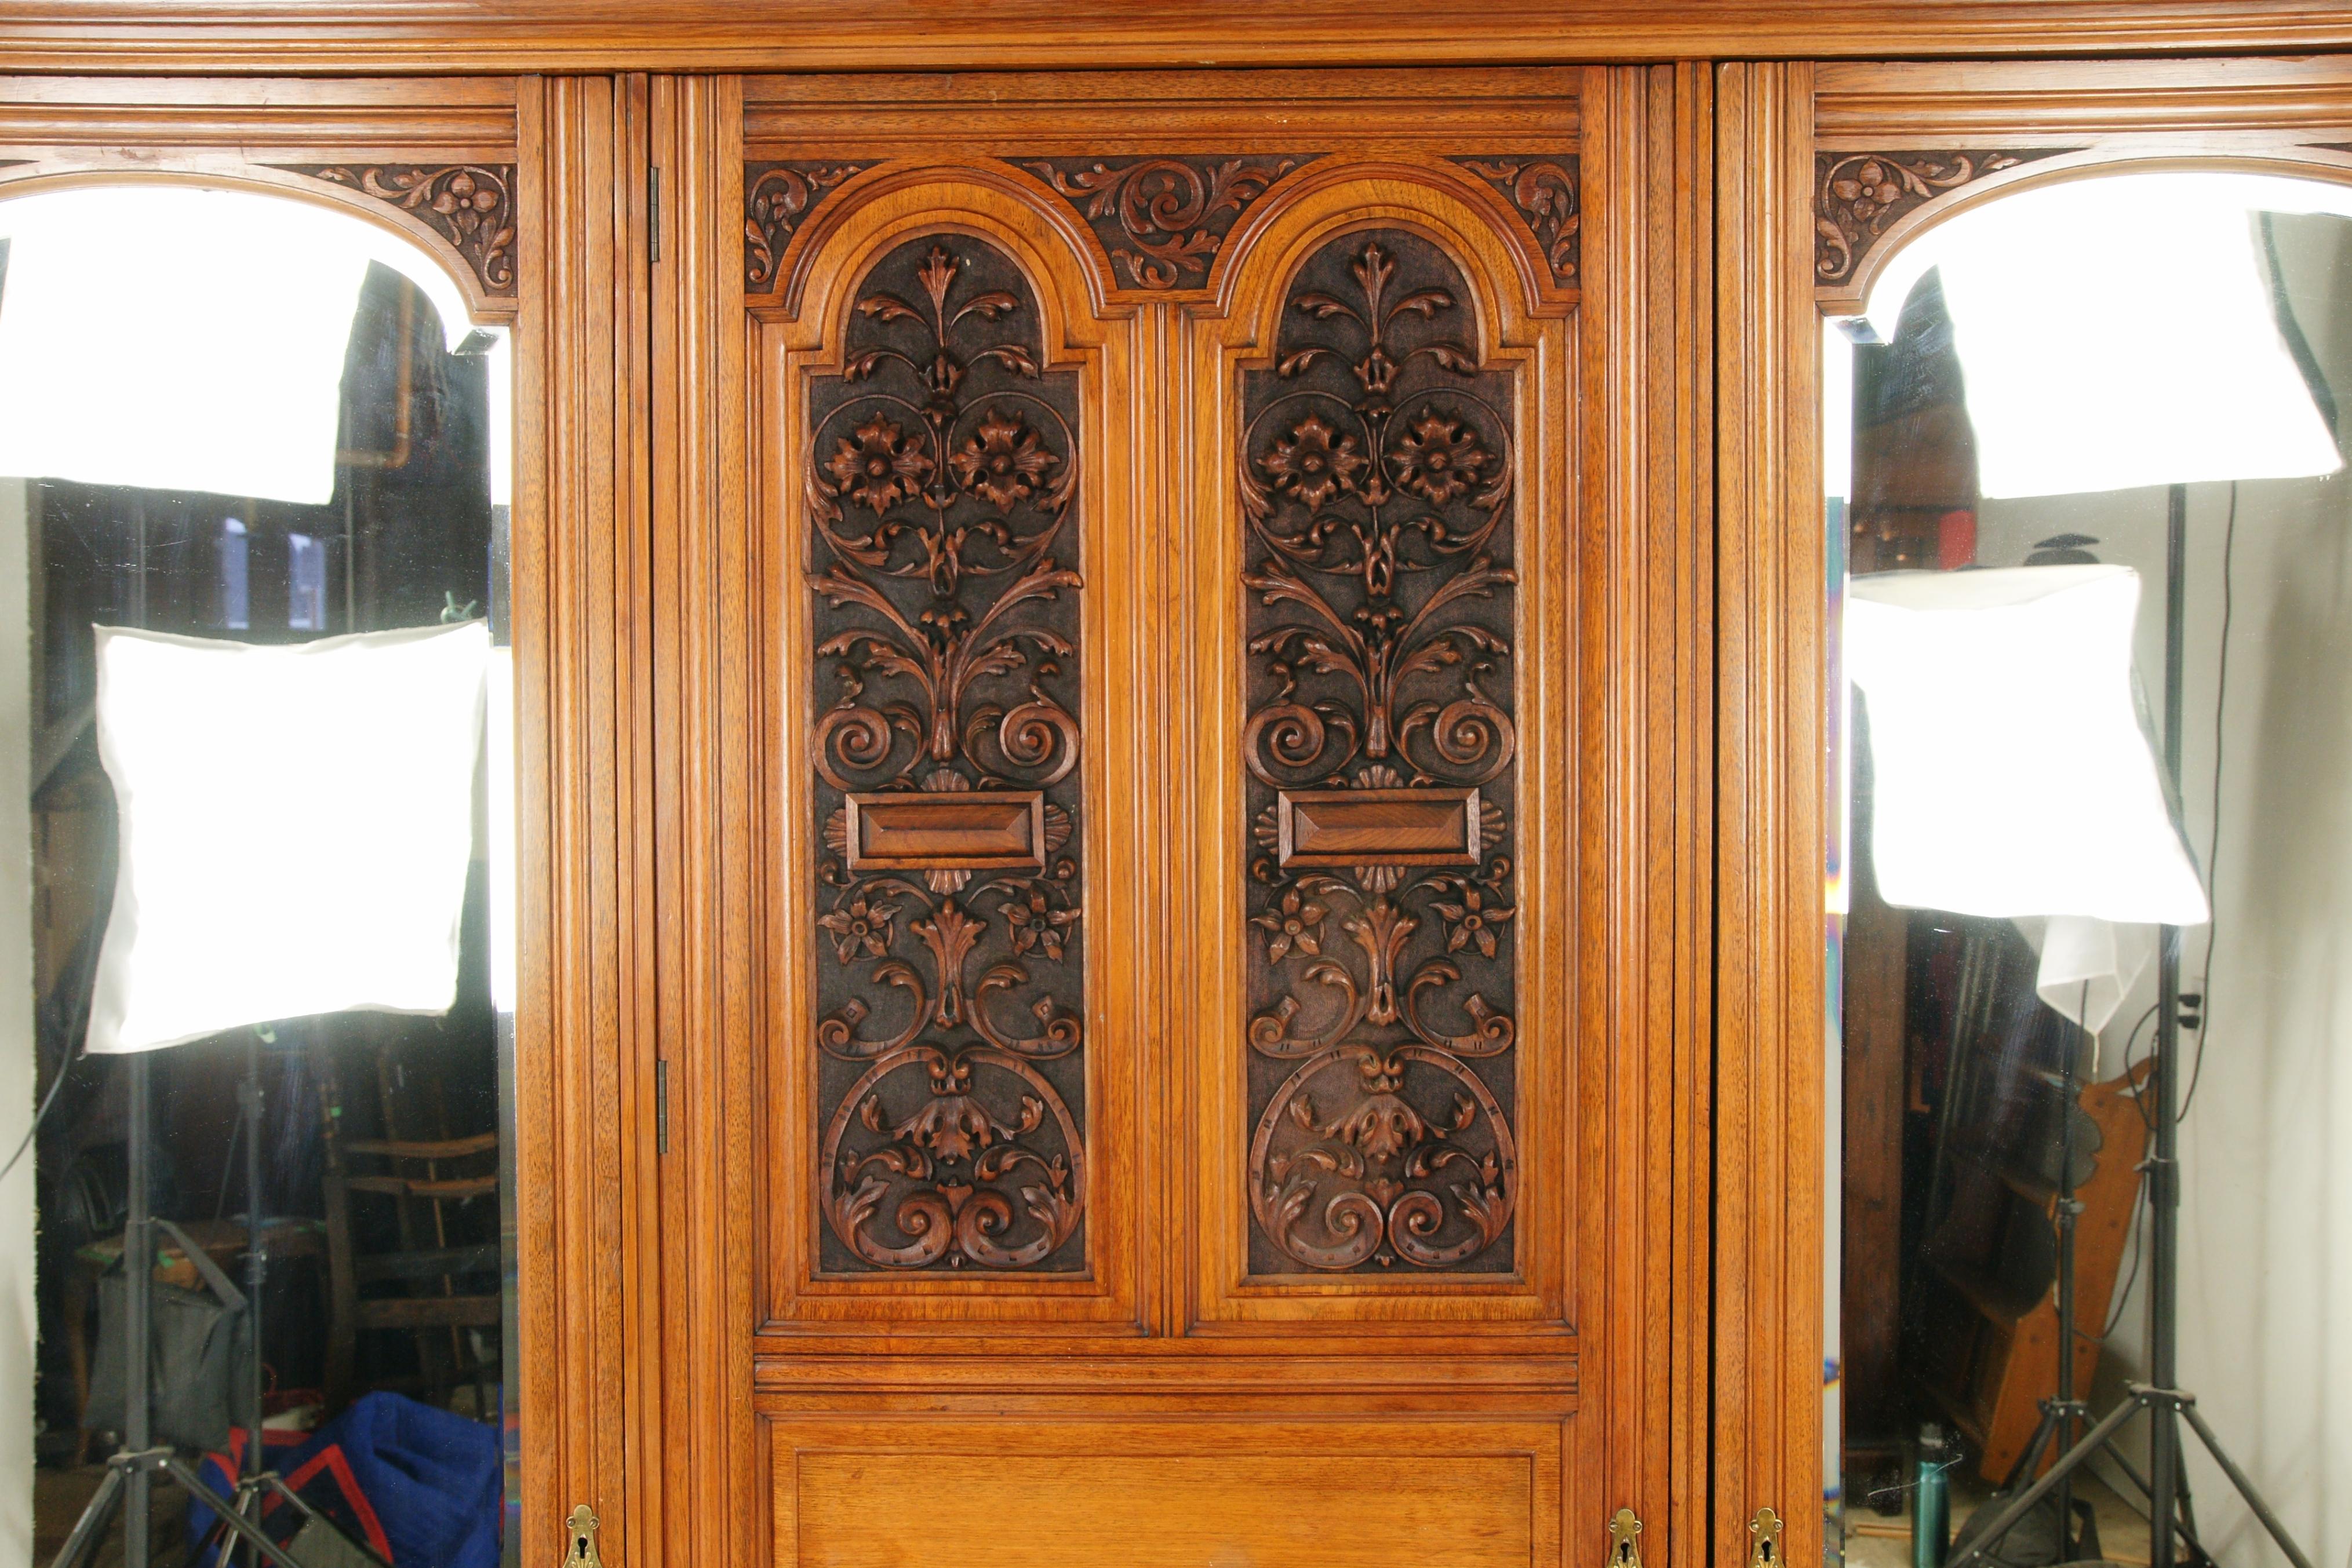 Antique walnut armoire, carved 3-door compaction closed wardrobe, Antique Furniture, Scotland 1880, B1719

Scotland 1880
Solid walnut
Original finish
Dentil cornice above
Central door with carved panel
Three raised panels below
Door opens to